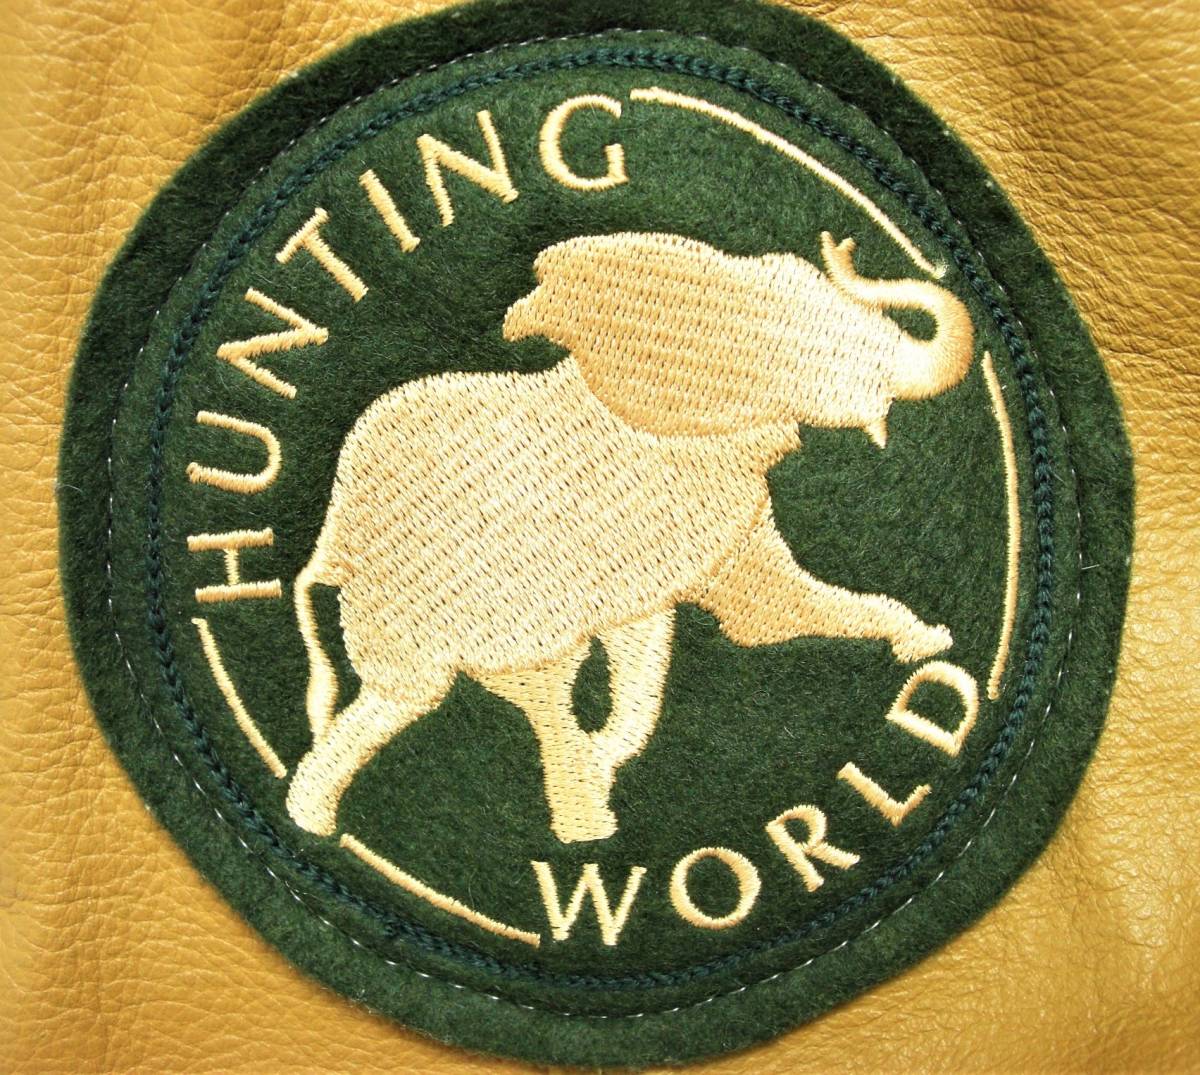  immediately complete sale!50 put on limitation 50th memory &s Koo cam W name! regular price approximately 18 ten thousand jpy . ultimate profit!. Logo embroidery &HW& extra-large Logo!SKOOKUM stadium jumper USA made Hunting World L~LL